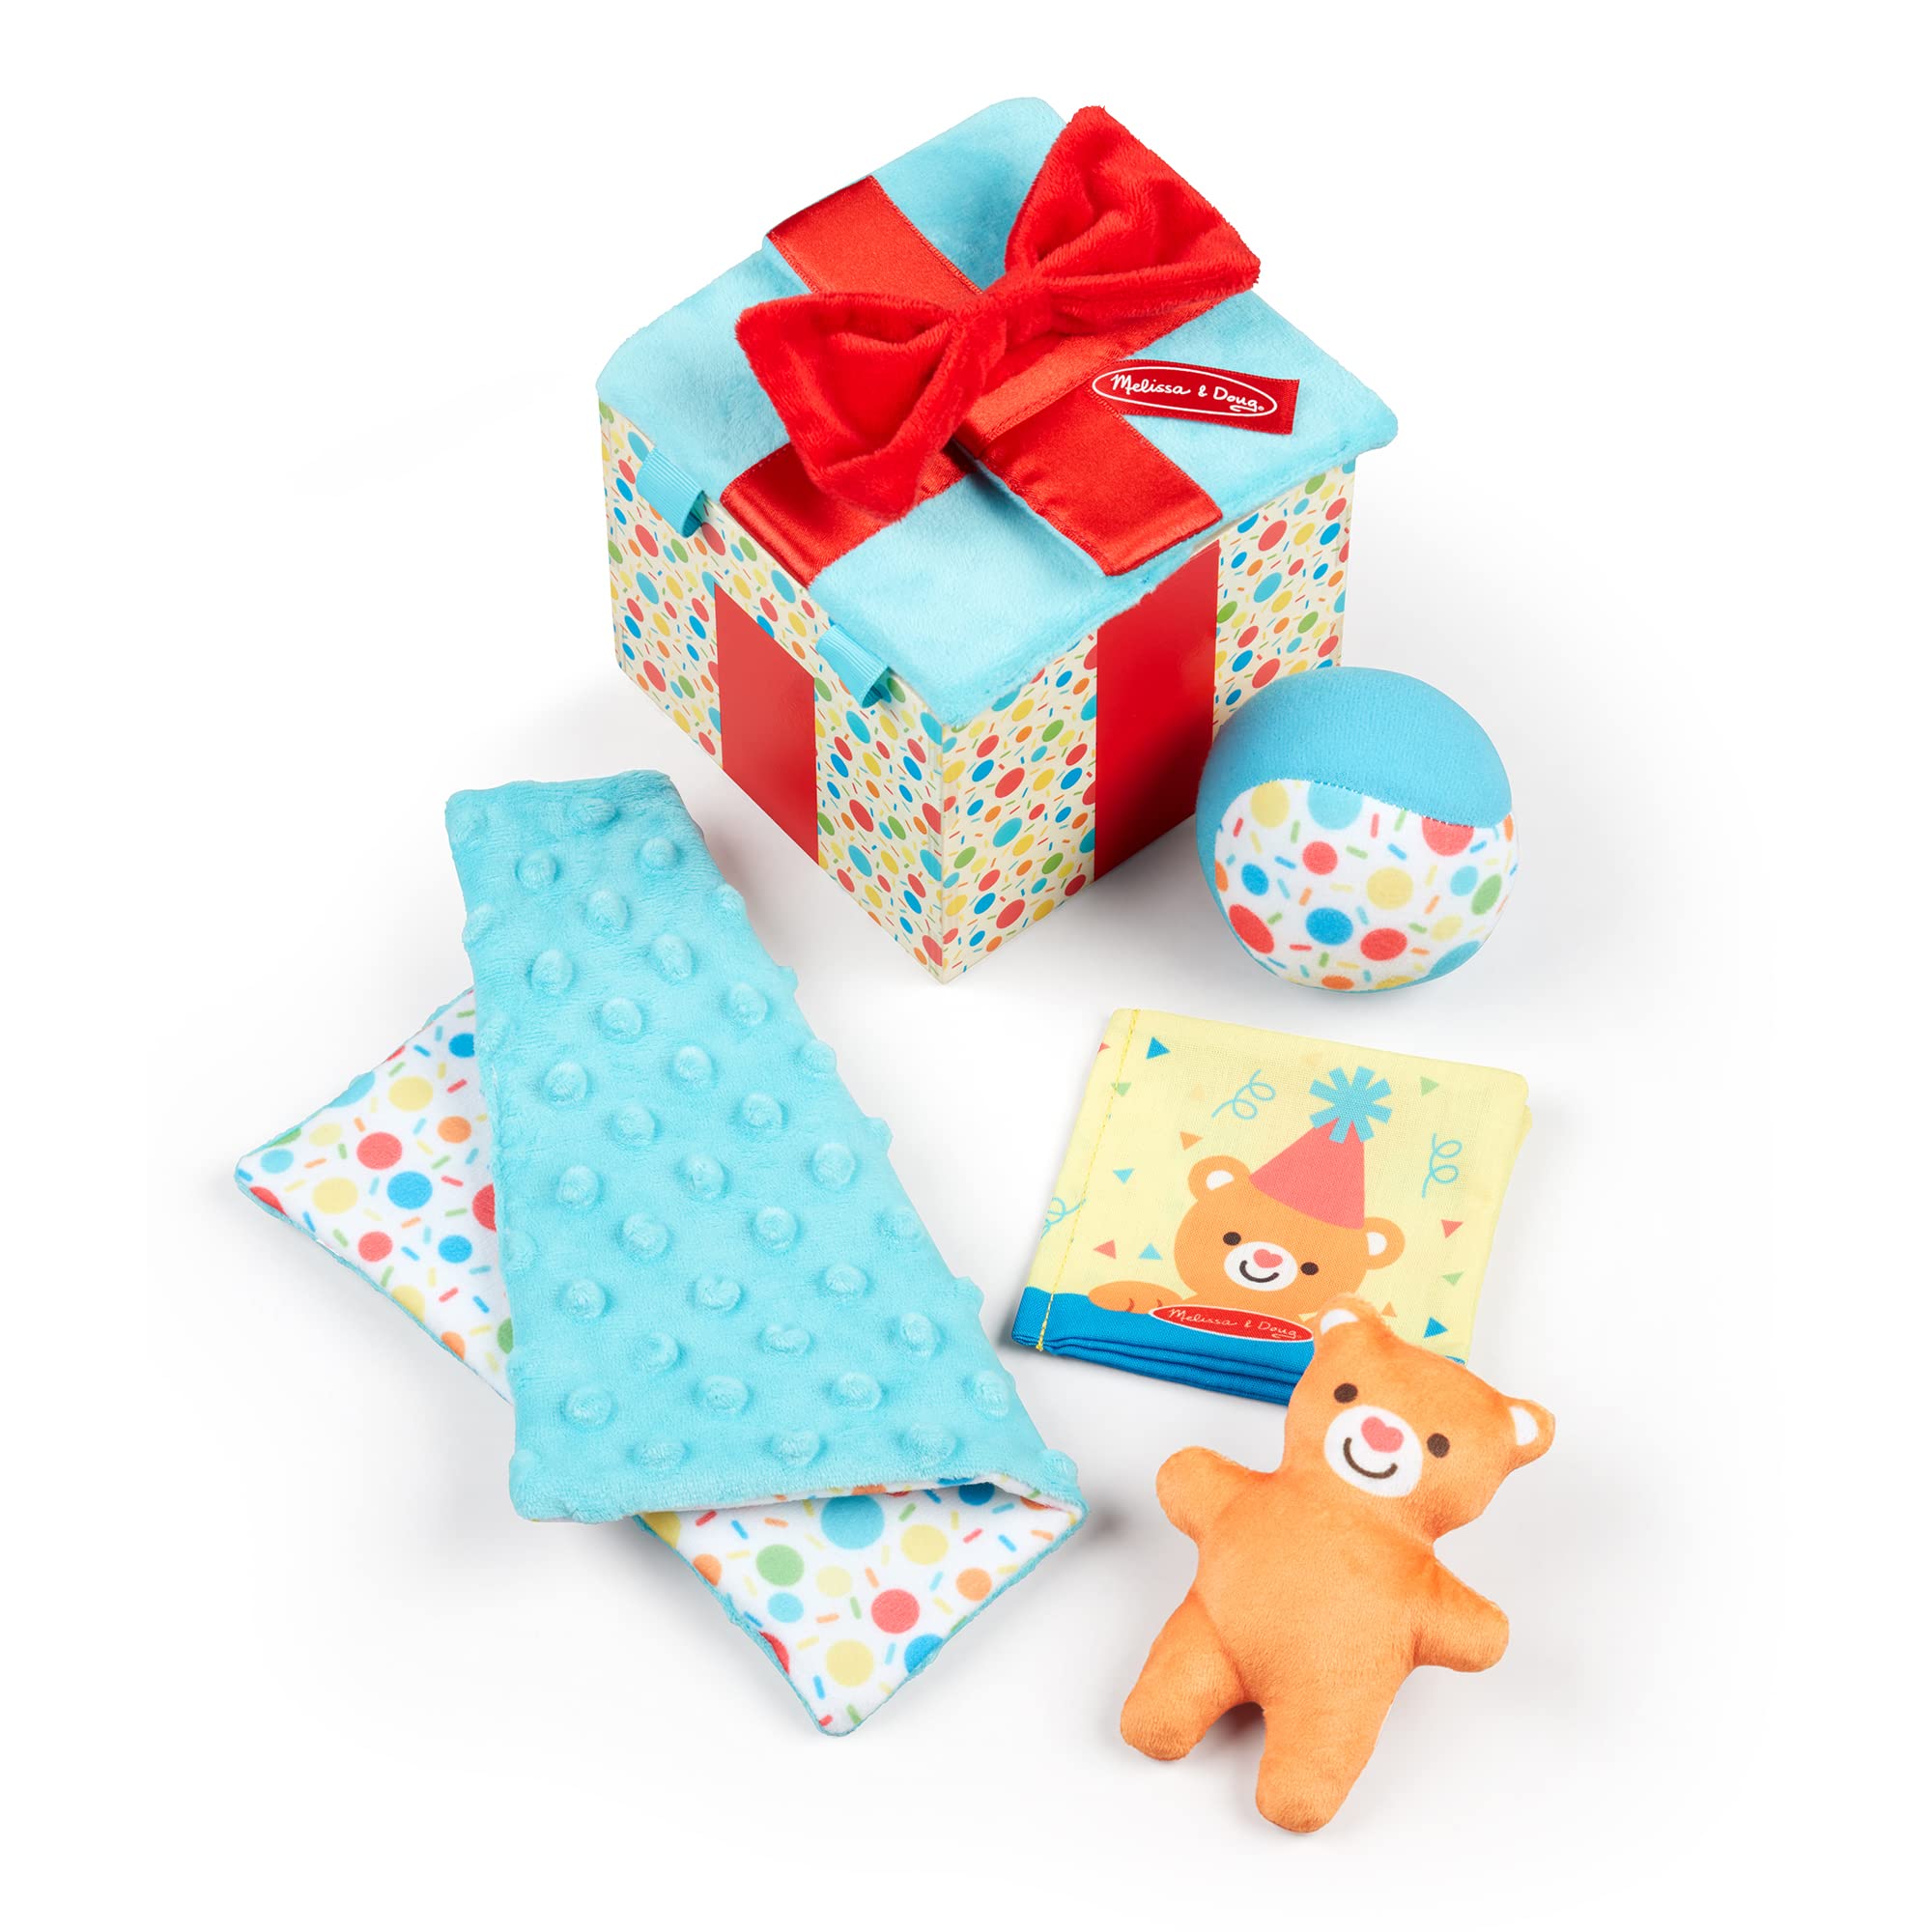 $5.99 (Prime Members): 5-Piece Melissa & Doug Wooden Baby Toy Surprise Gift Box